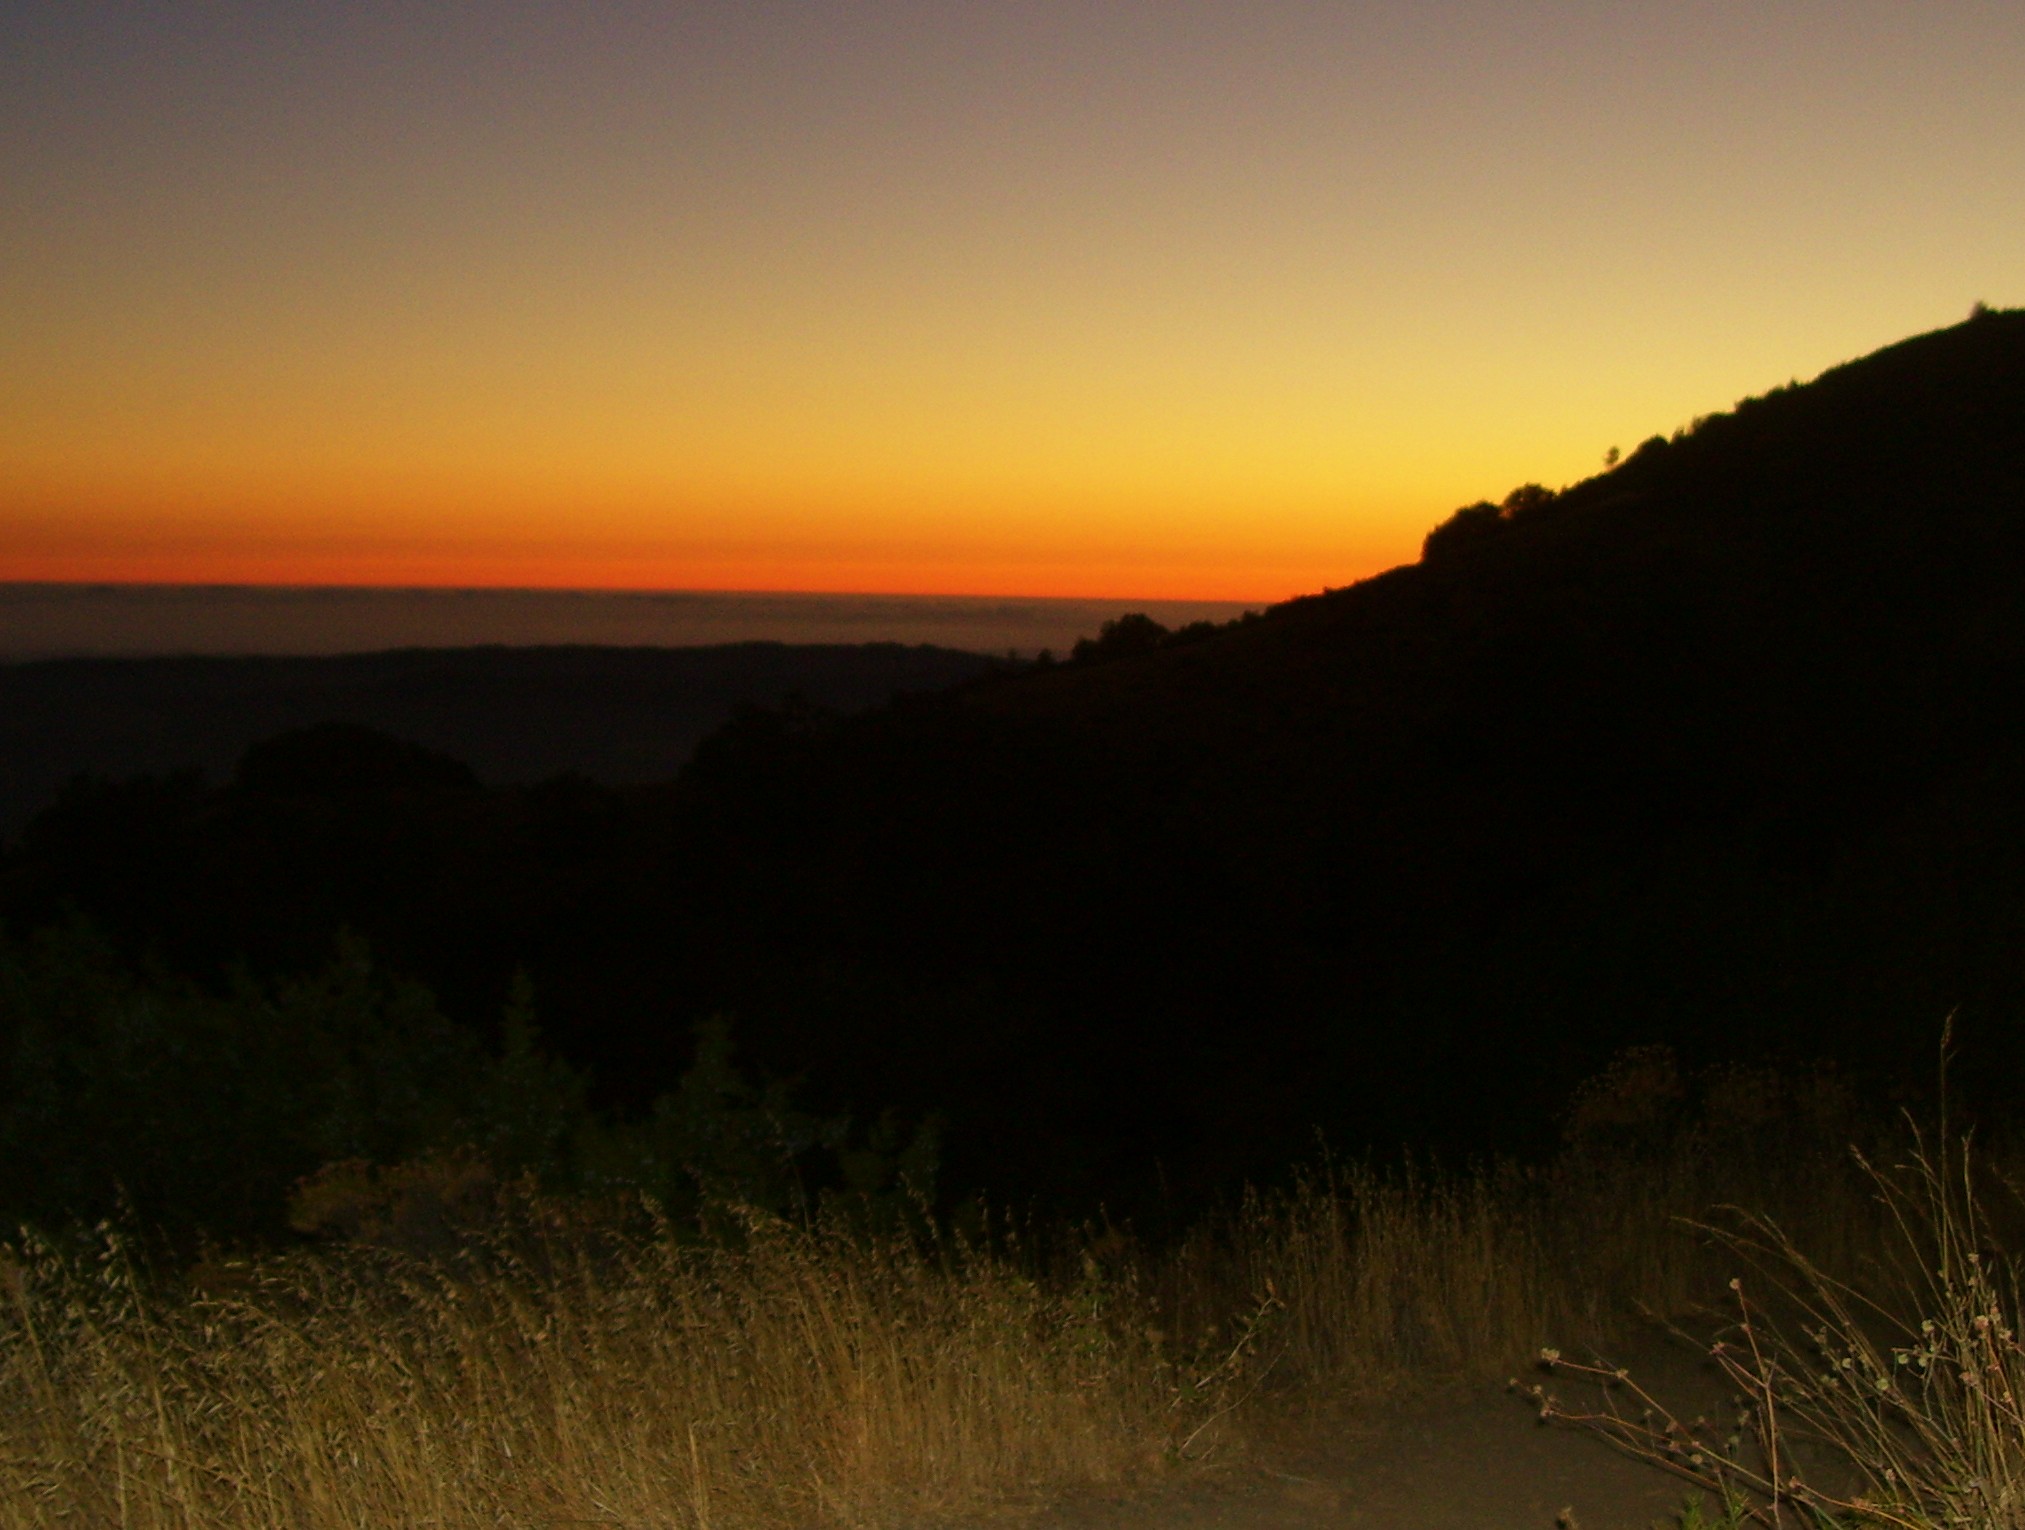 Sunset from Mt. Diablo in the San Francisco Bay Area